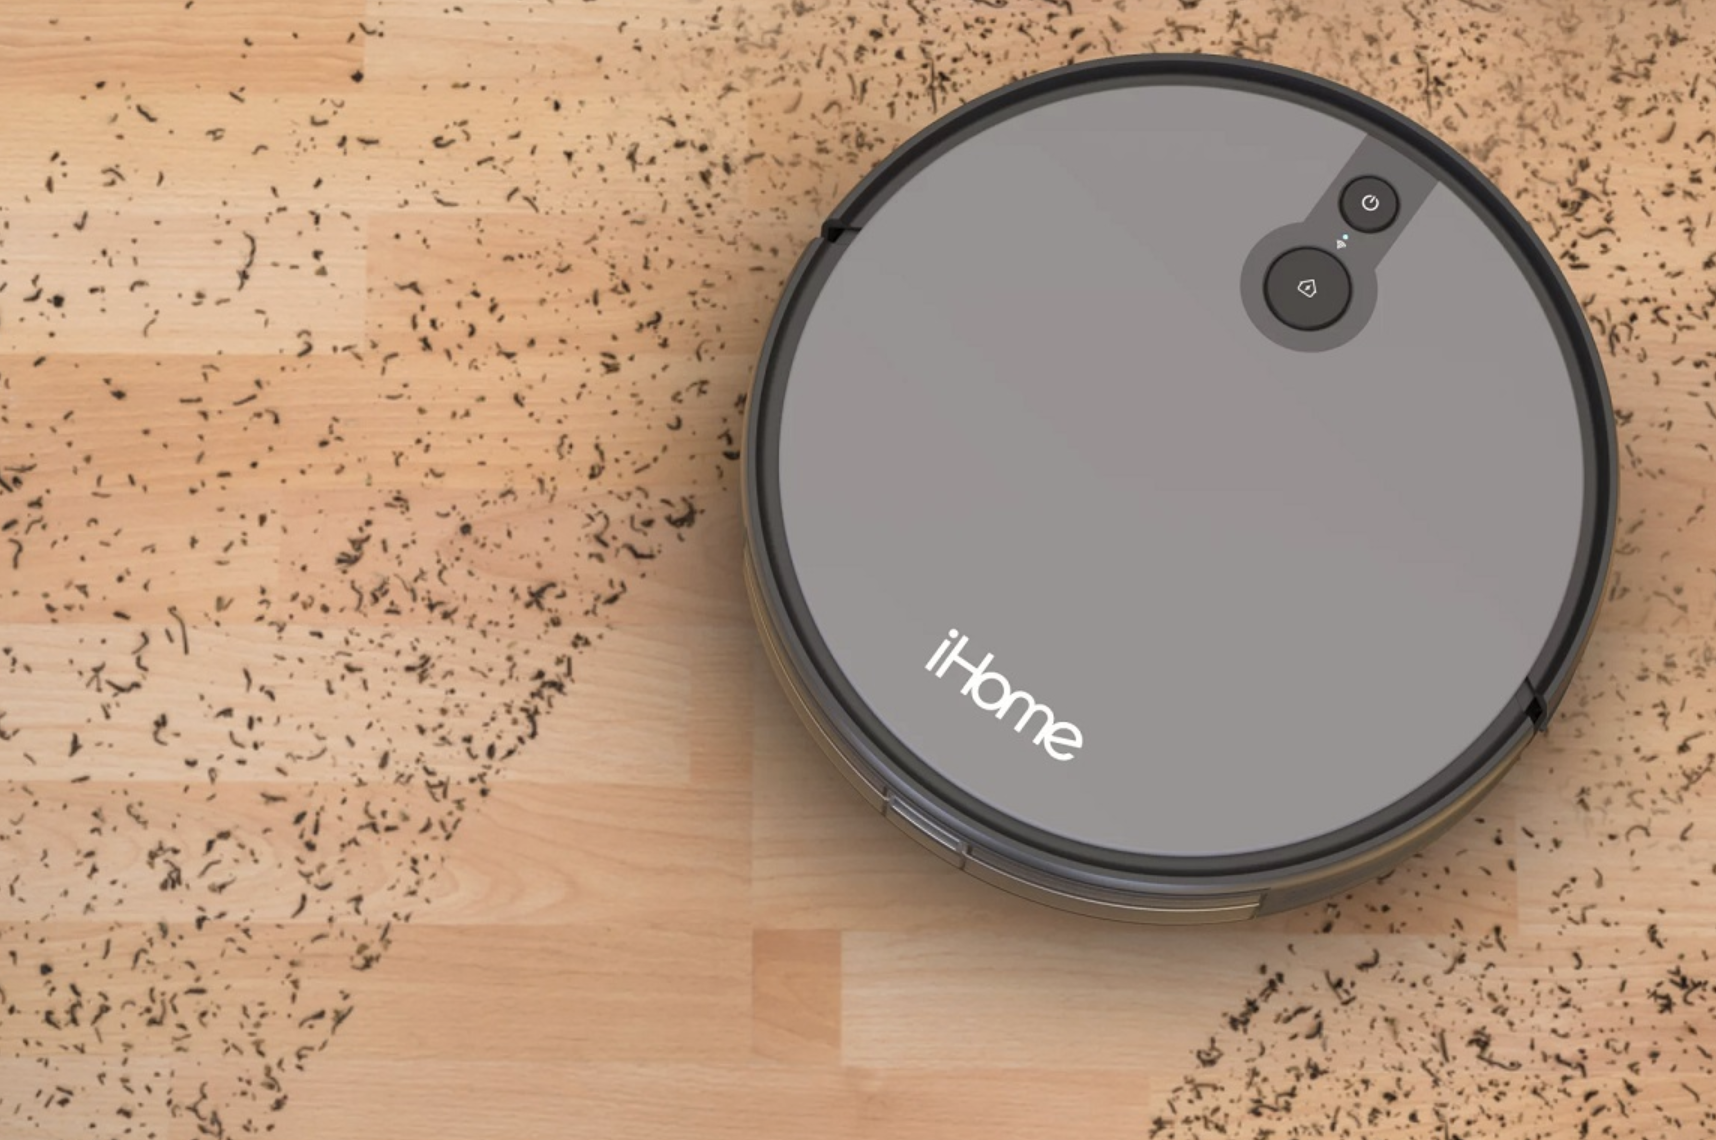 Incredible! What the Xiaomi X10 robot vacuum cleaner is capable of